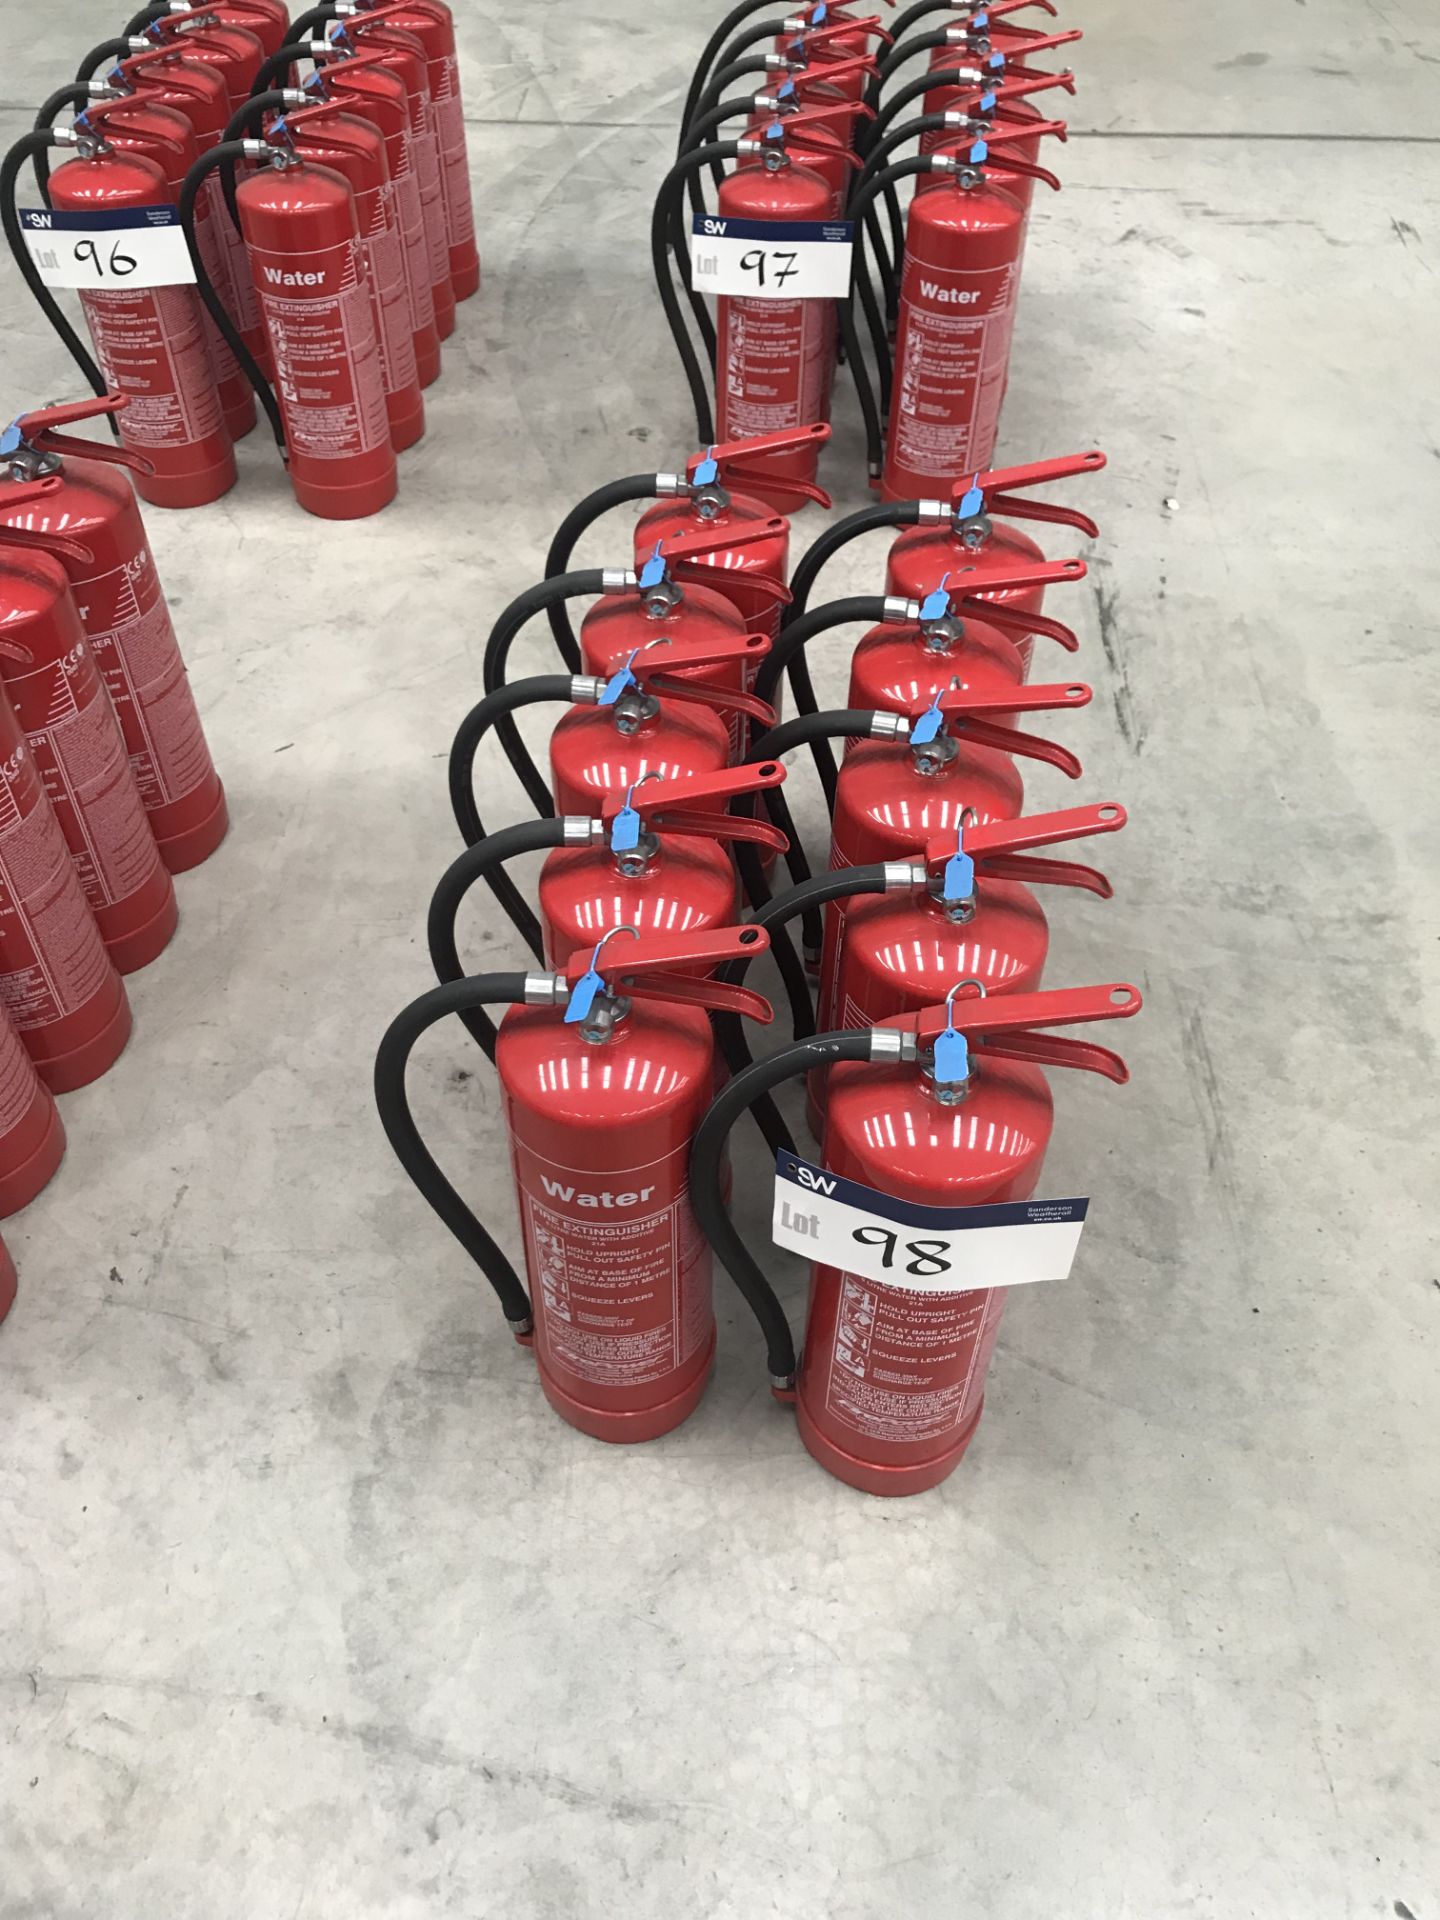 10 x 6ltr Water Fire Extinguishers